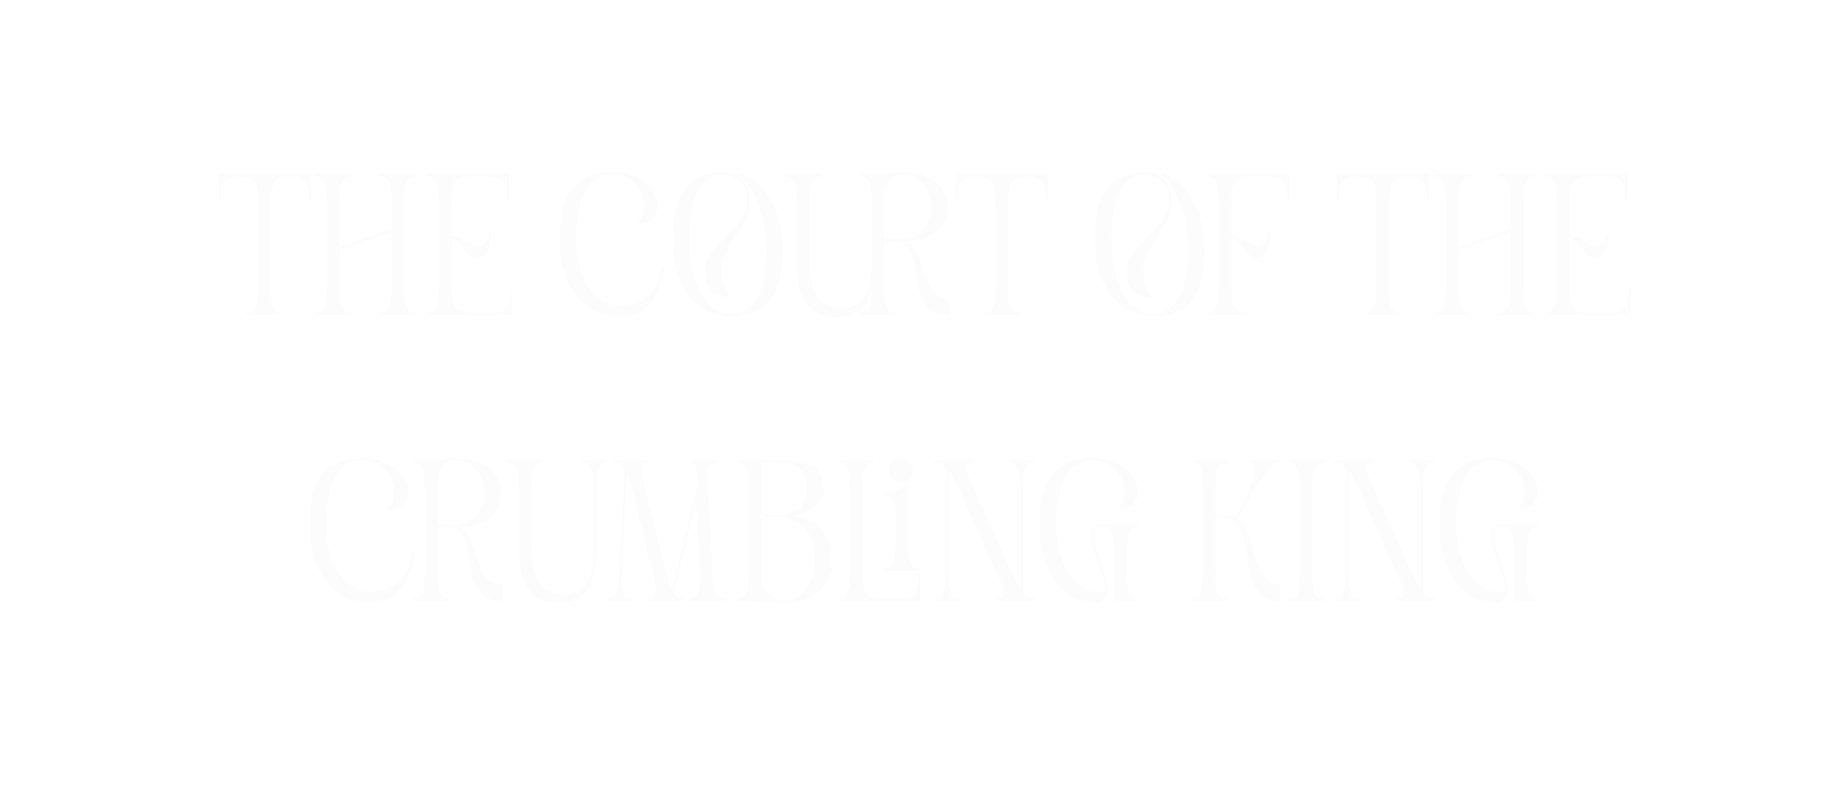 The Court of the Crumbling King